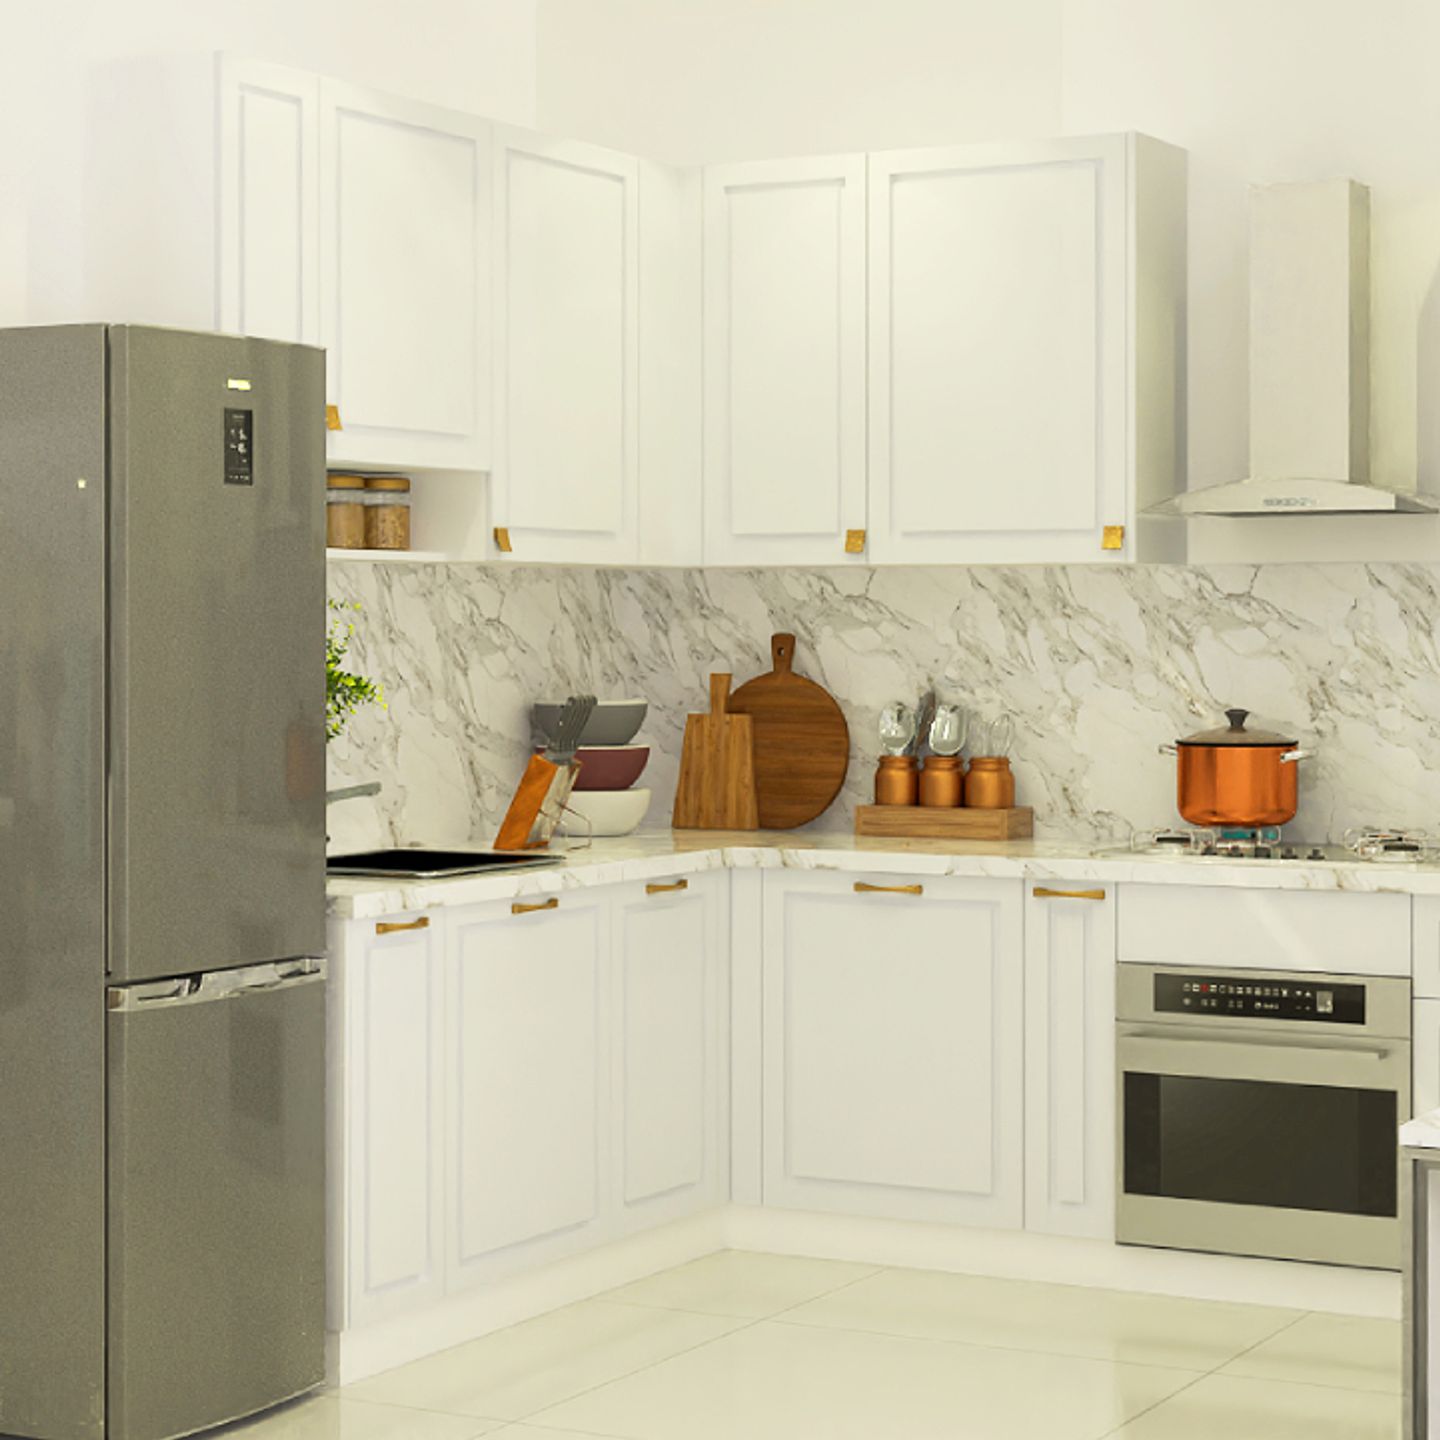 Modern L-Shaped Kitchen Design With Off White Cabinets